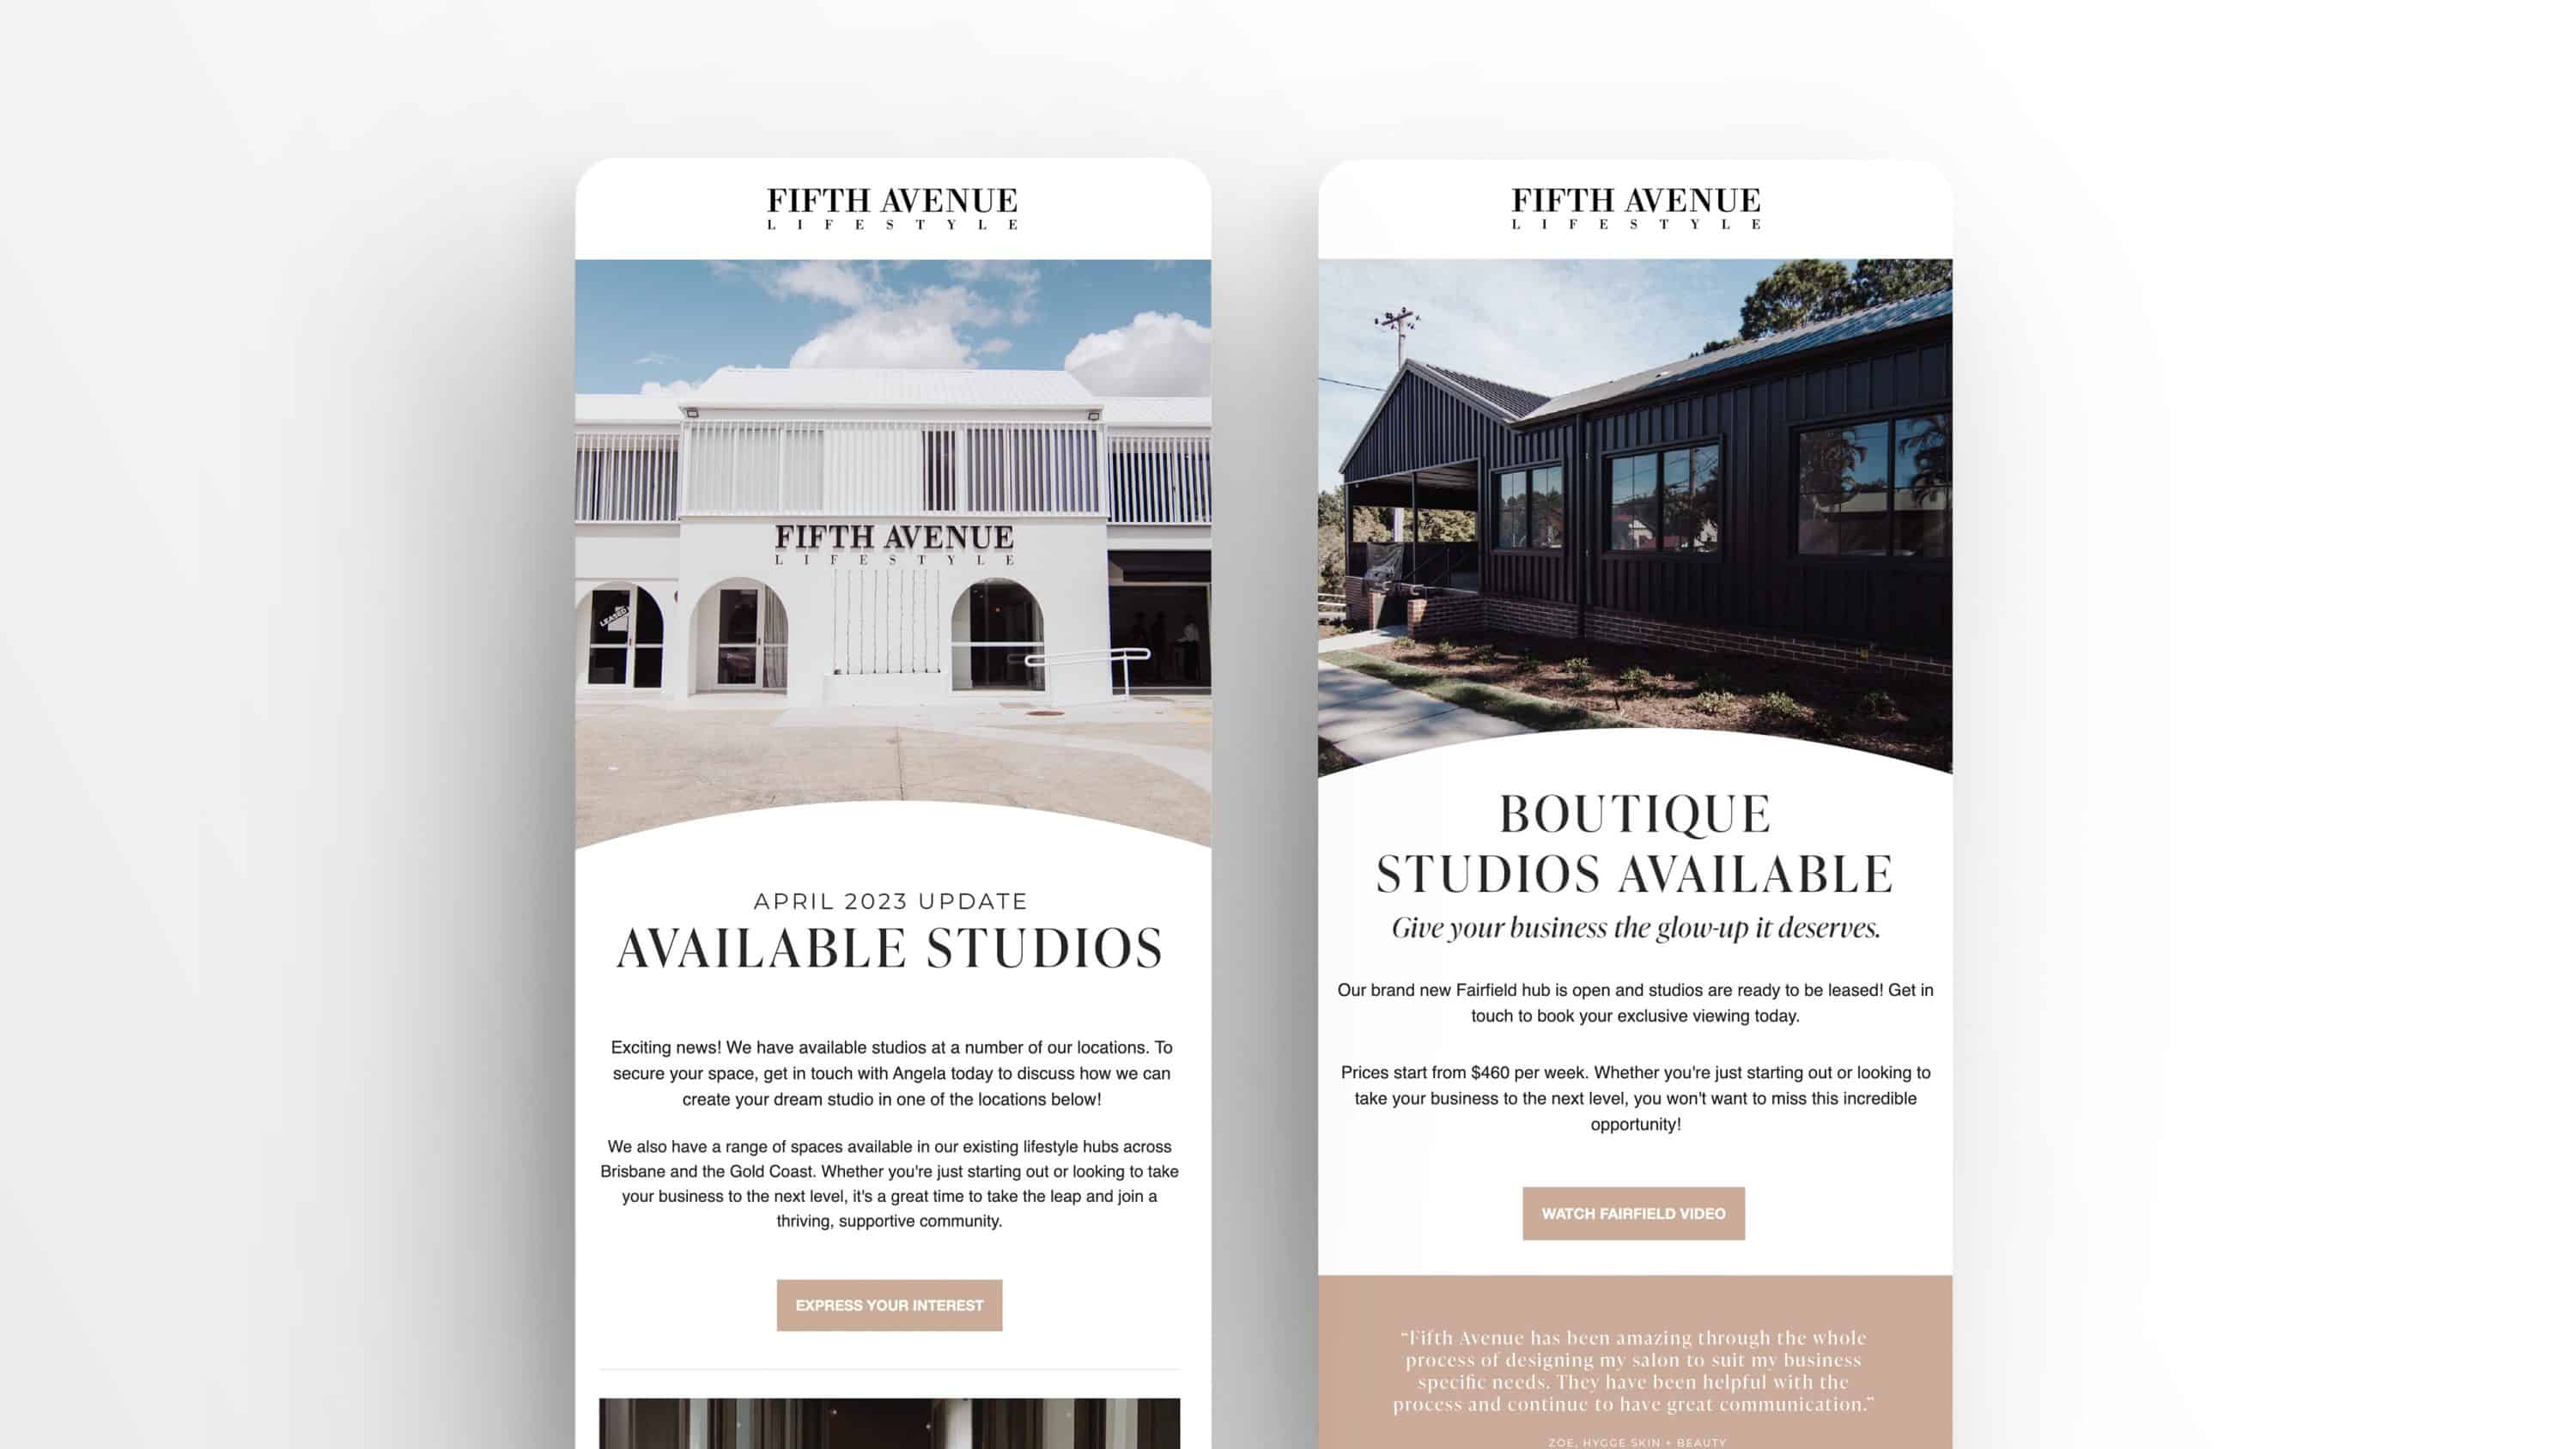 Fifth Avenue Lifestyle - Property Brand and digital marketing